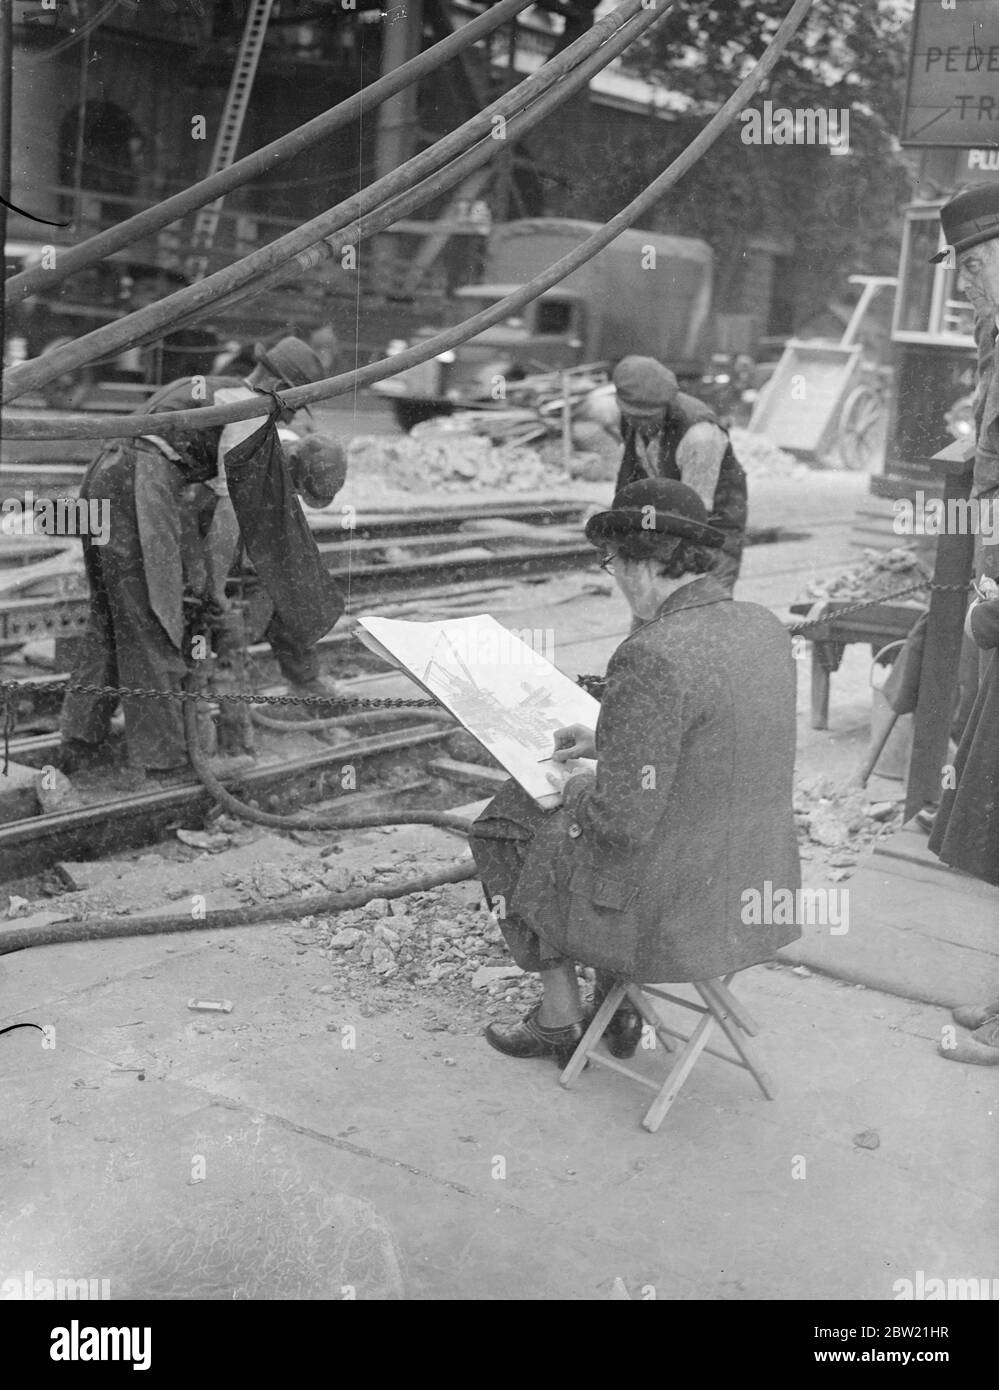 A woman artist found a noisy spot among the pneumatic drills as she sketched the final demolition work on the remains of old Waterloo Bridge. The workmen are shifting the tram tracks to the new tunnel made necessary by the demolition work. 2 September 1937 Stock Photo